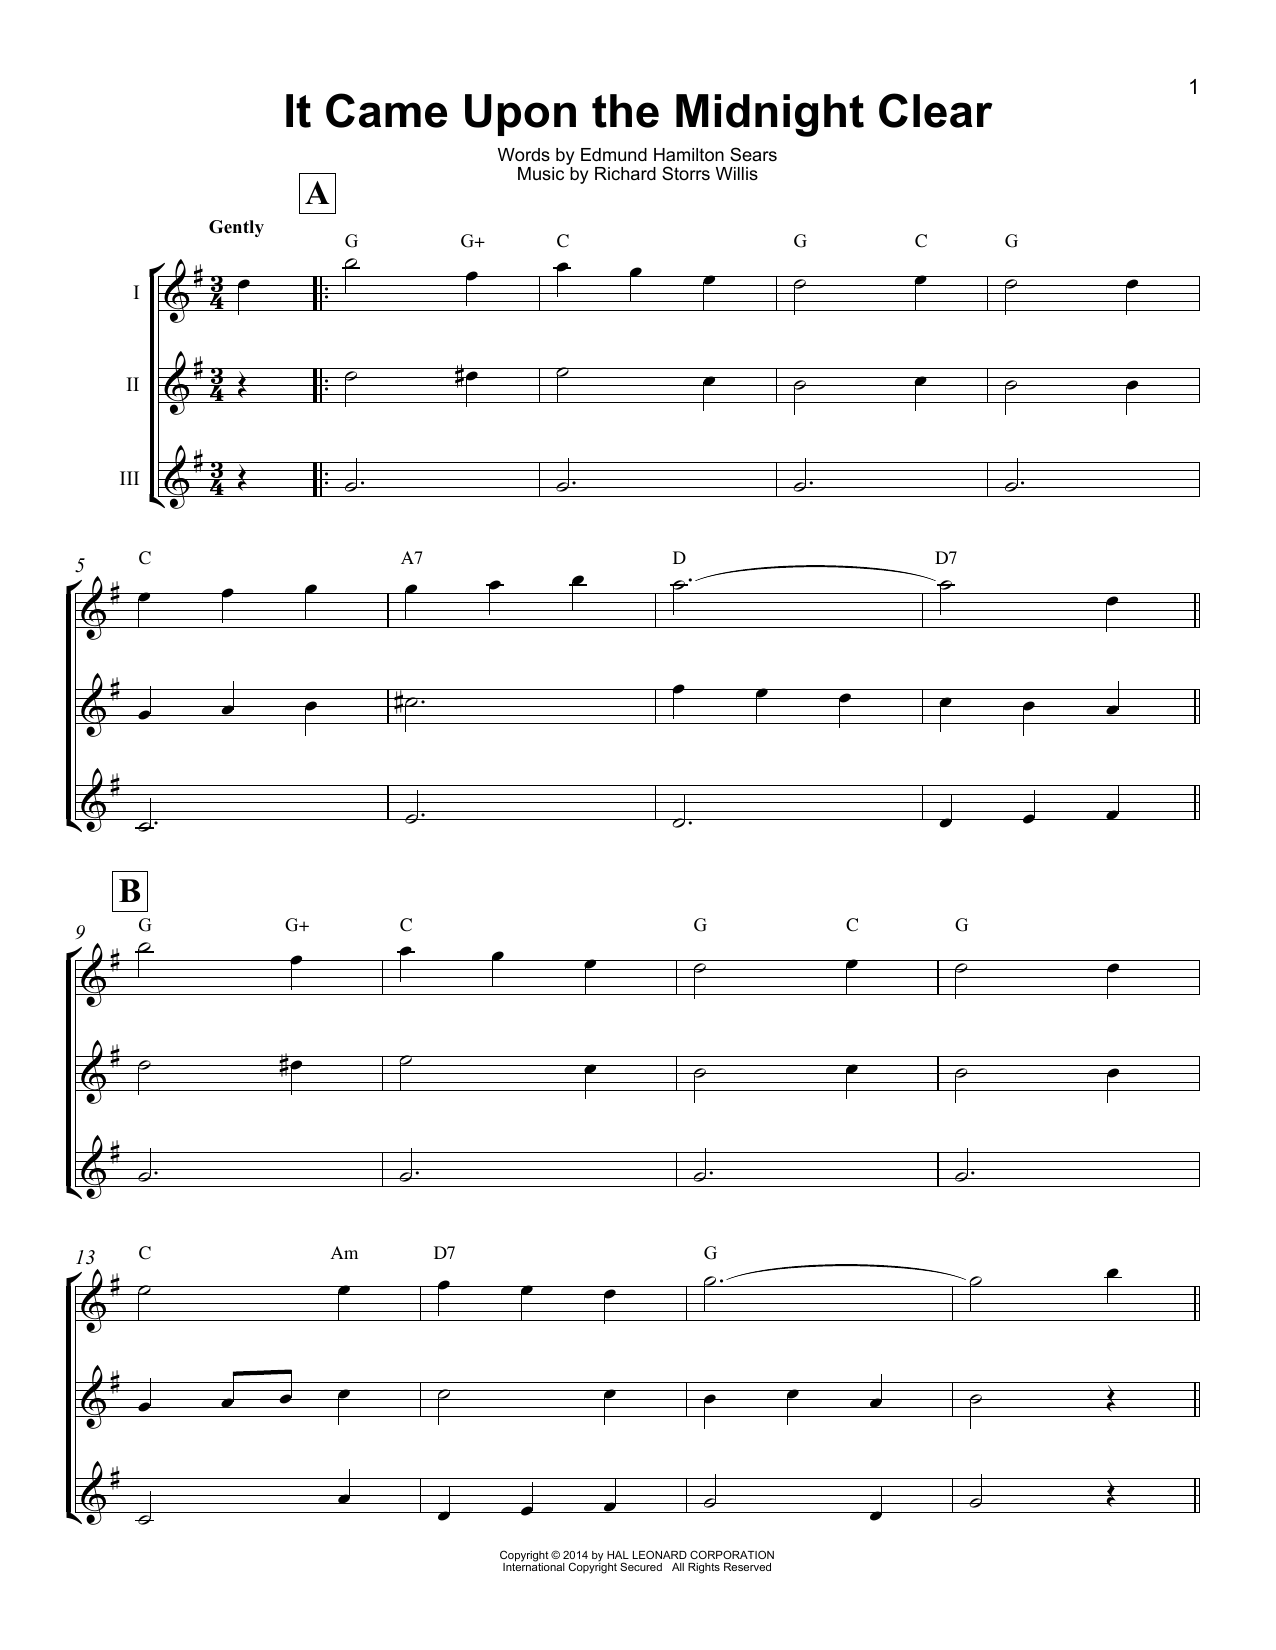 Richard Storrs Willis It Came Upon The Midnight Clear sheet music notes and chords. Download Printable PDF.